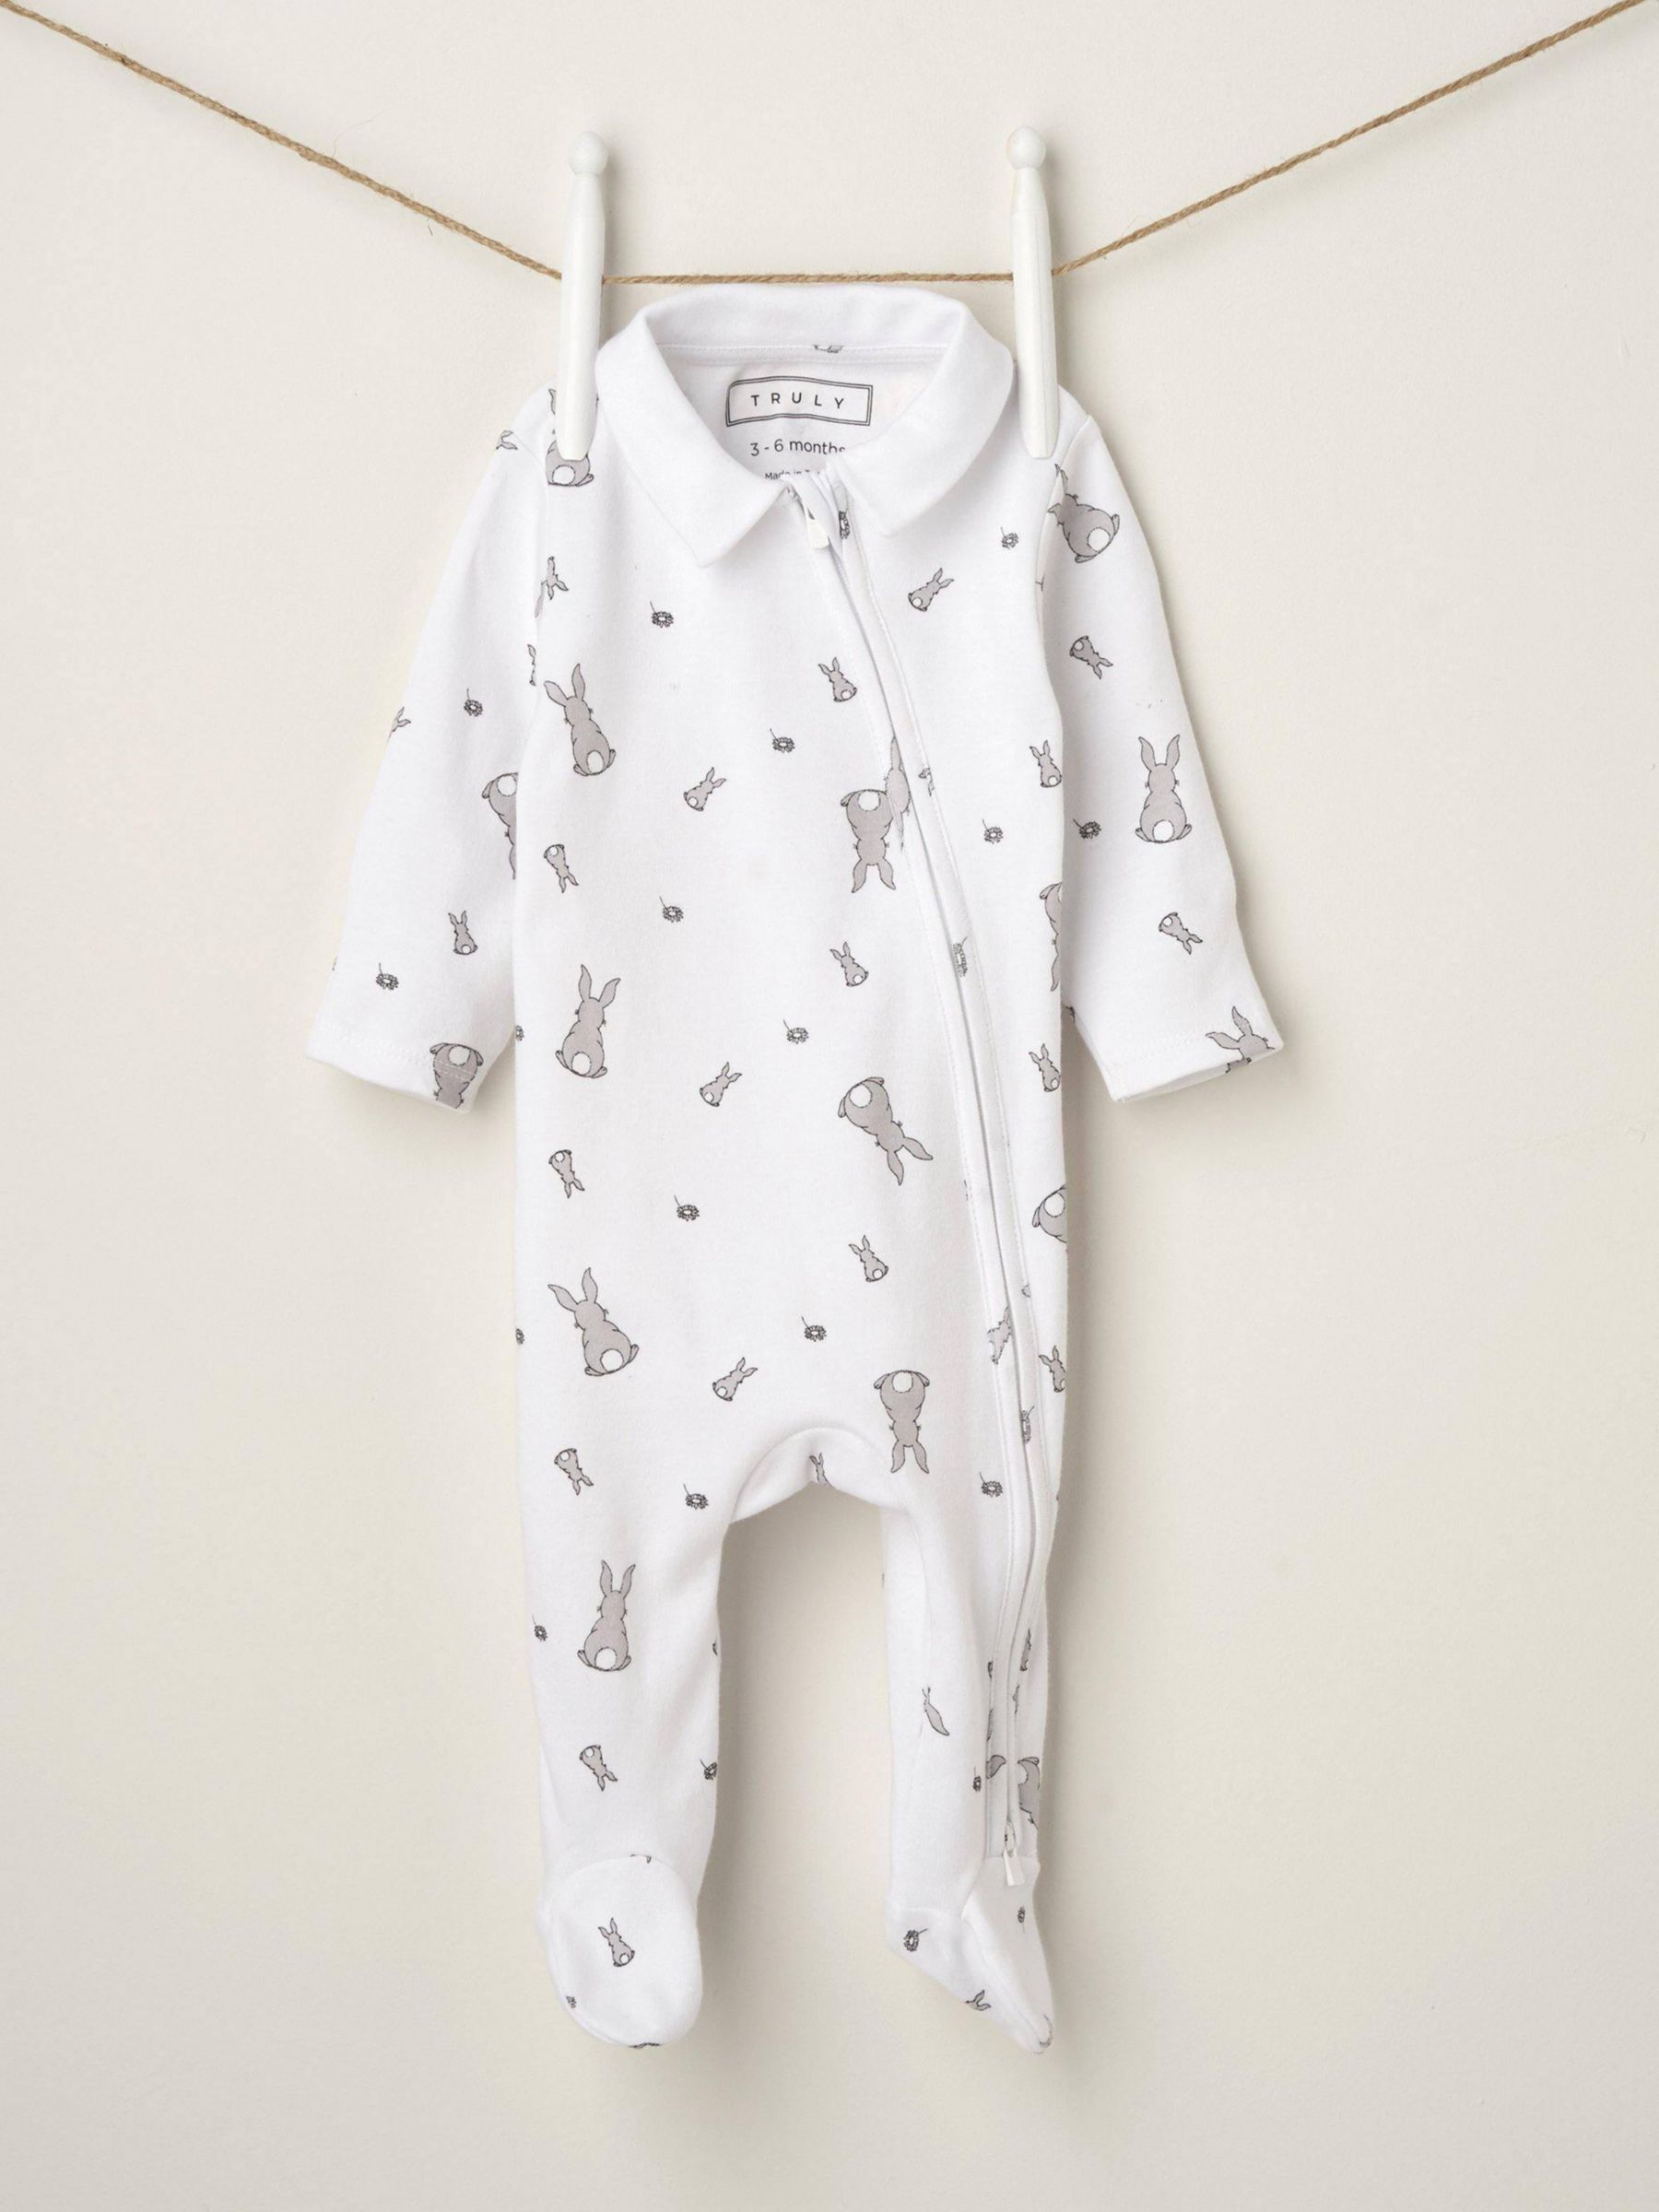 Truly Baby Bunny Print Collared Babygrow, White, 0-3 months